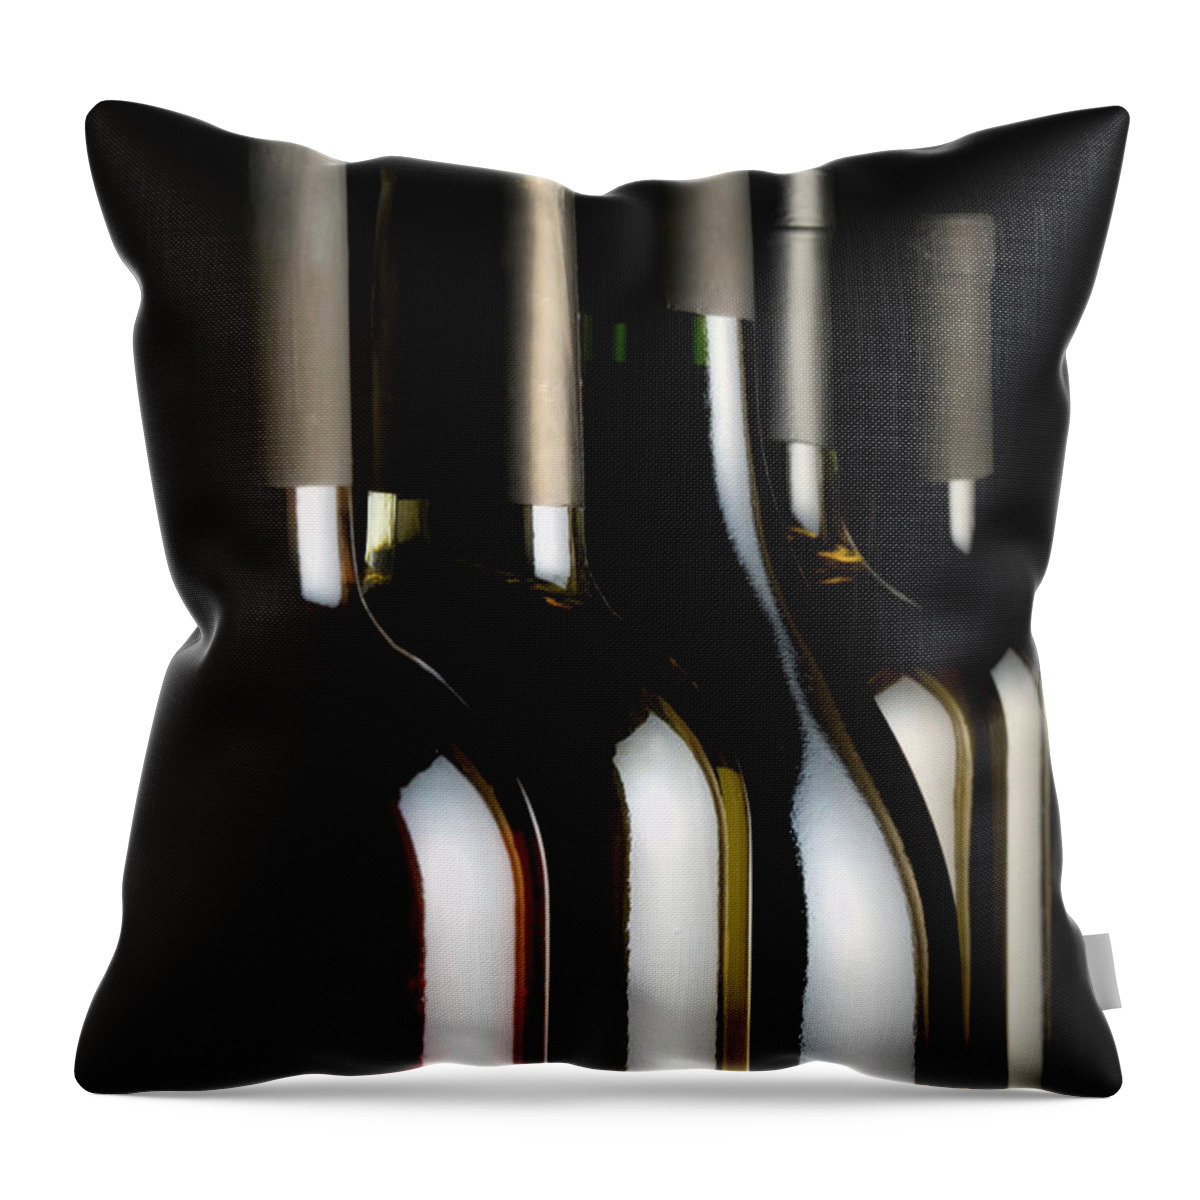 Curve Throw Pillow featuring the photograph Wine Bottles #1 by Carlosalvarez